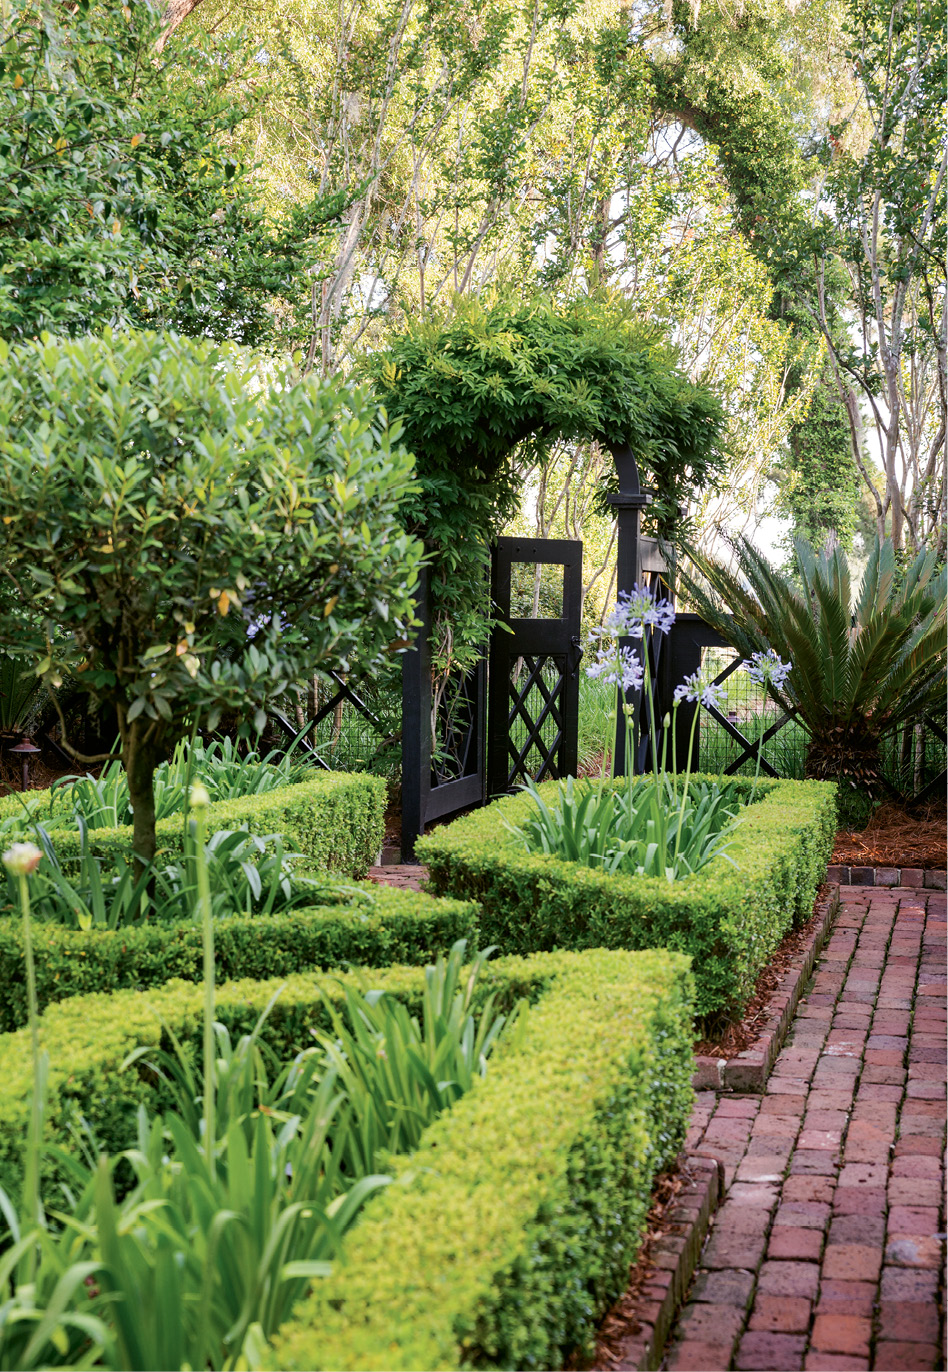 River Walk: A gateway offers an invitation toward the Wappoo through a formal allée edged by crape myrtles and old Charleston brick.